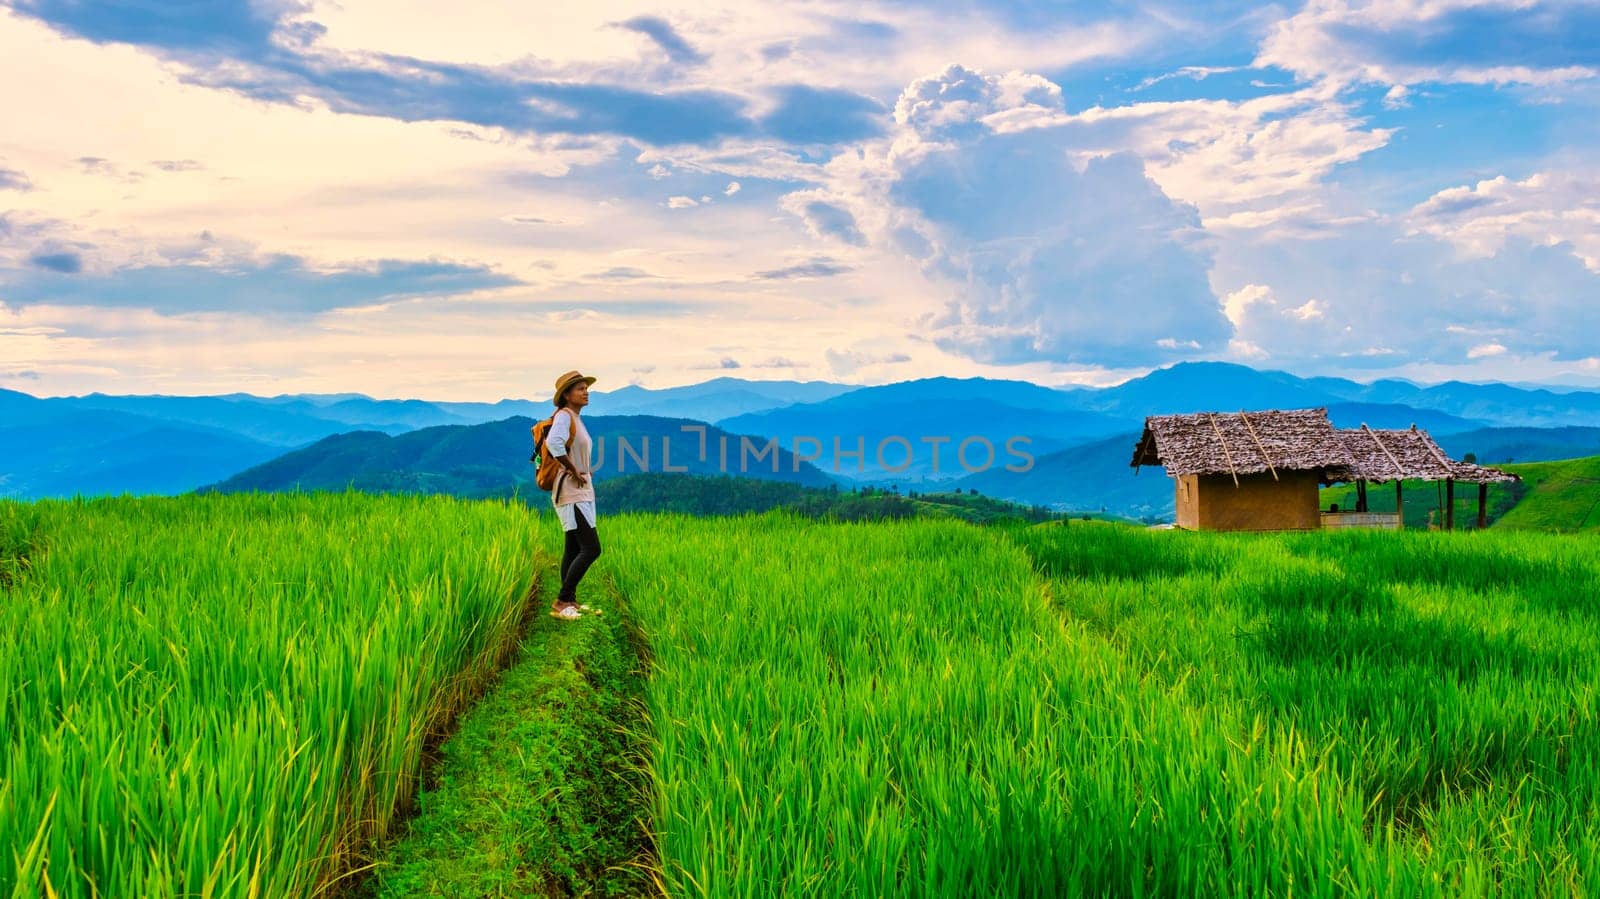 Terraced Rice Field in Chiangmai, Thailand, Asian woman walking hiking in the mountains at sunset by fokkebok